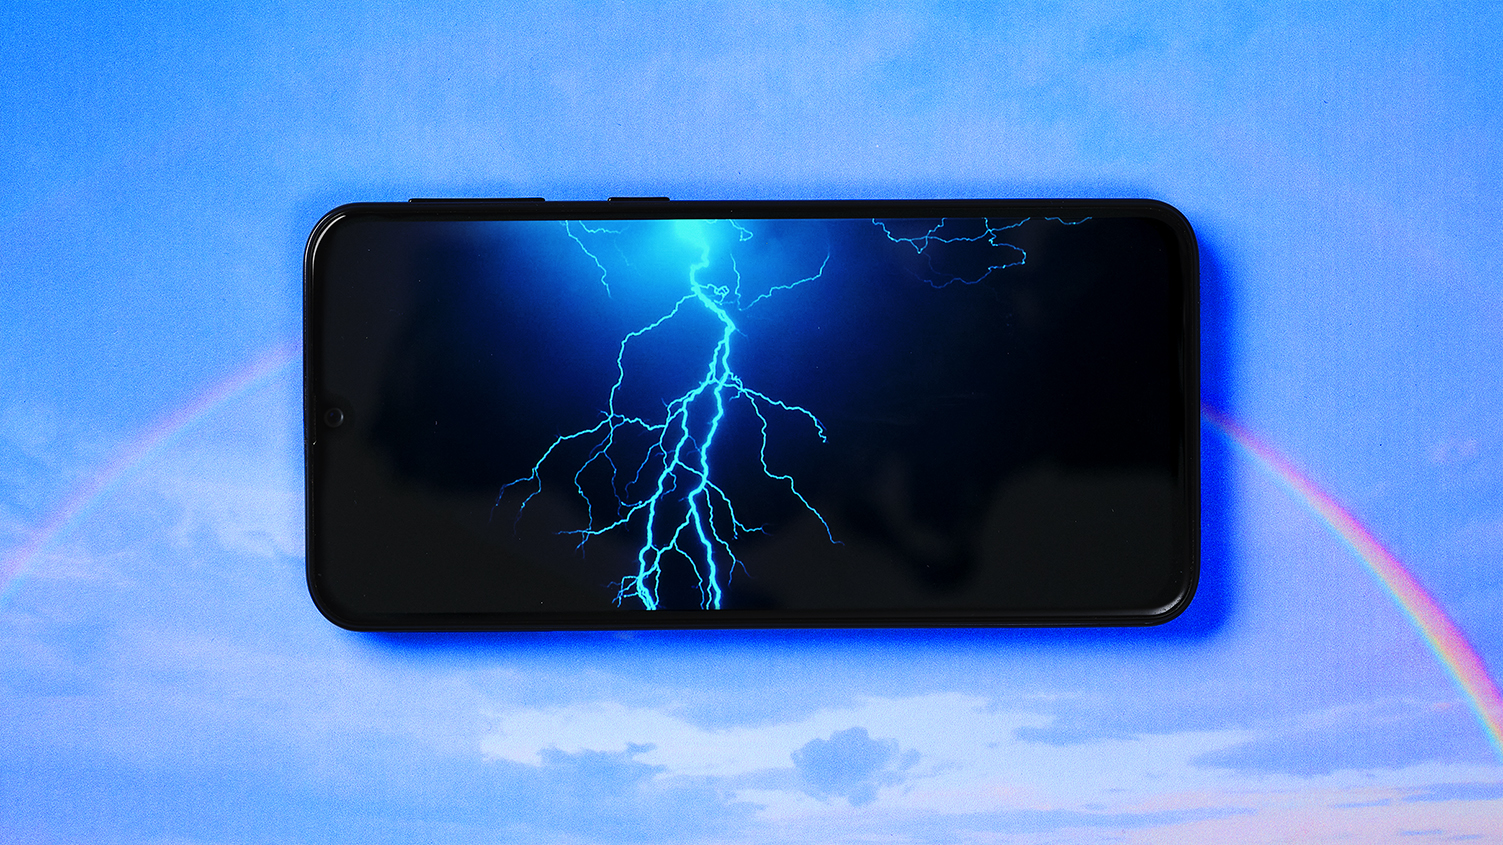 A lightning storm on a mobile phone screen over the image of a rainbow in a blue sky.